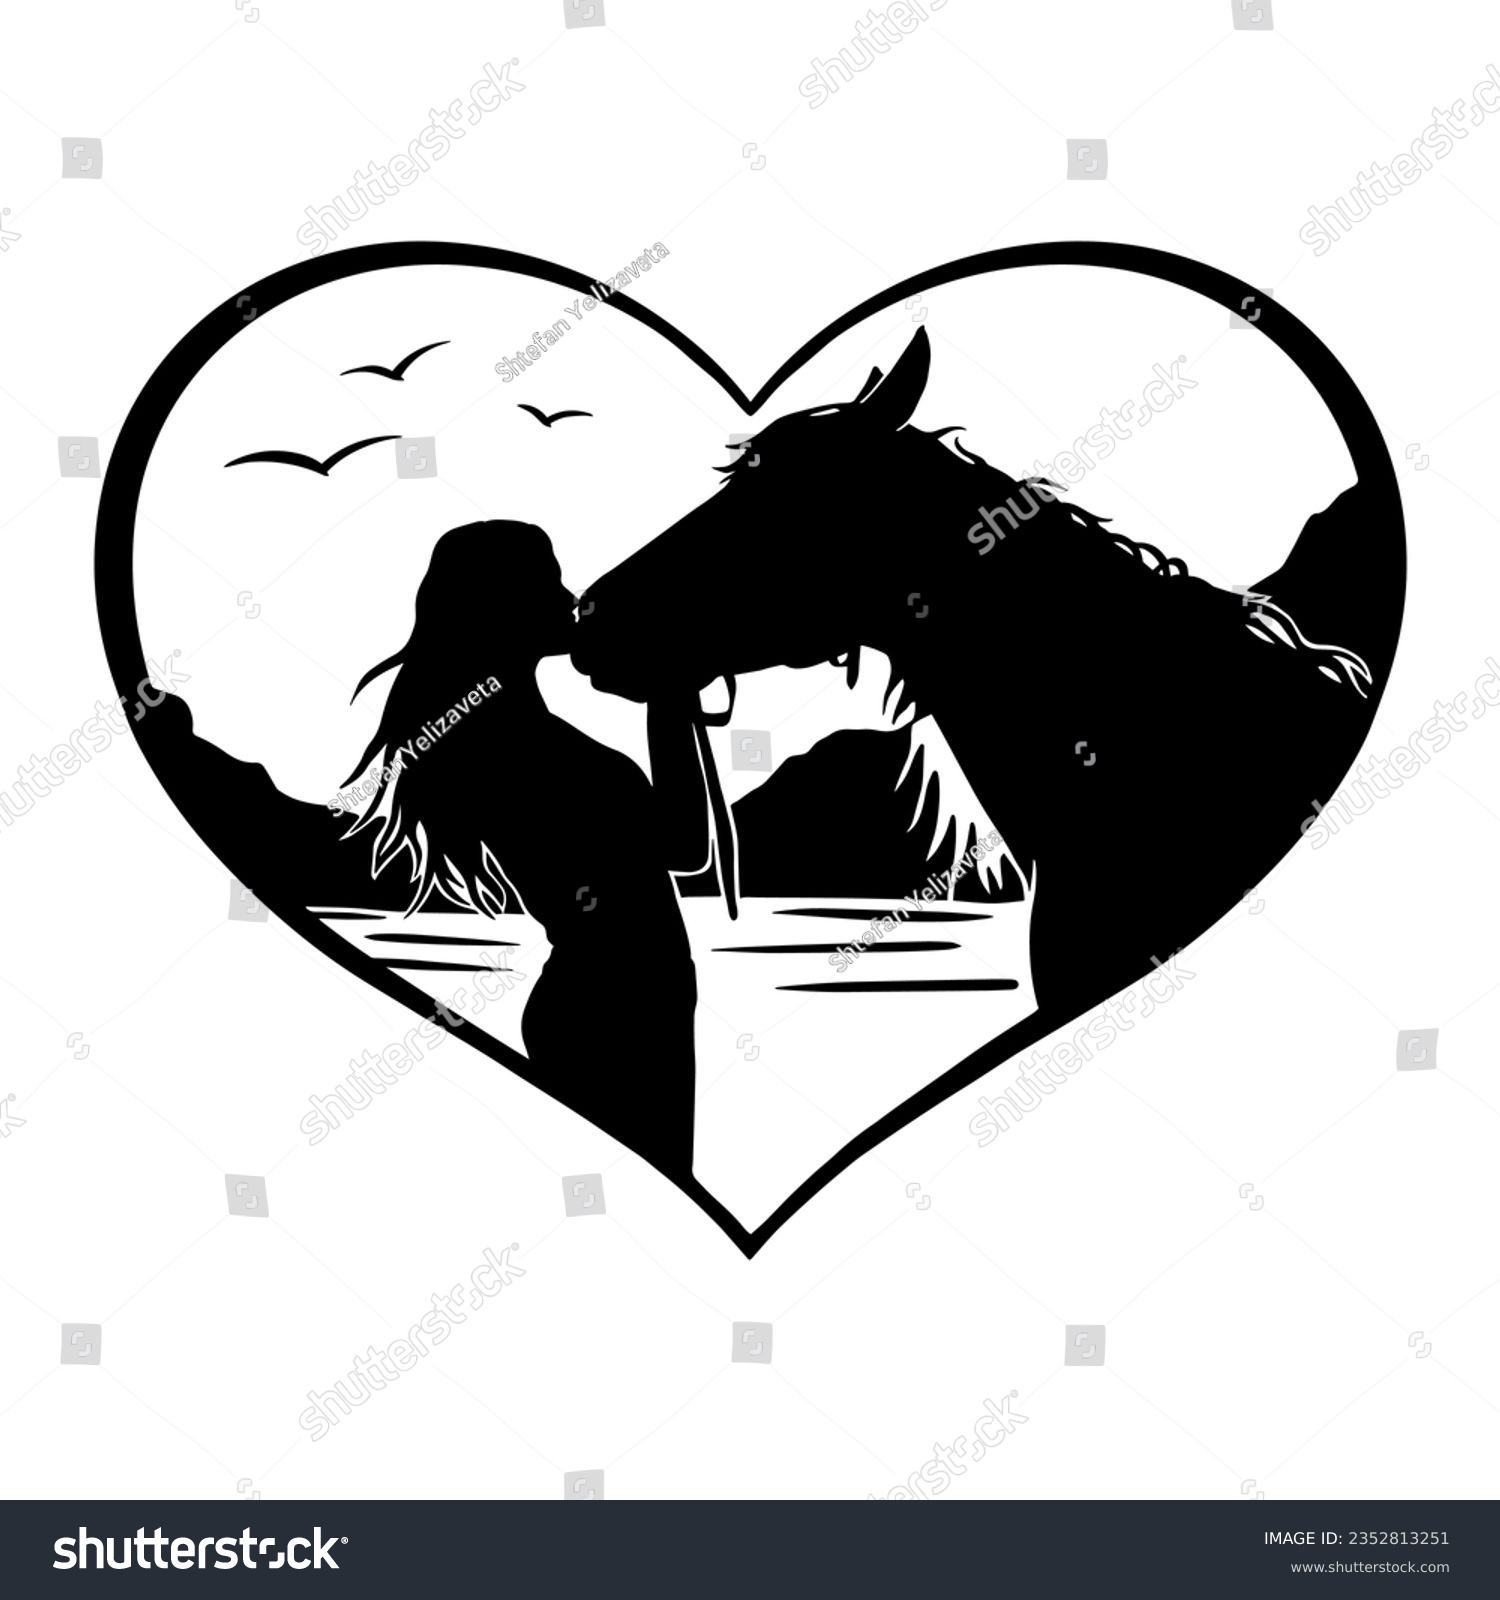 SVG of Silhouette of a woman and a horse in a heart. Horse love hand drawn illustration for plotter cutting. Vector logo svg